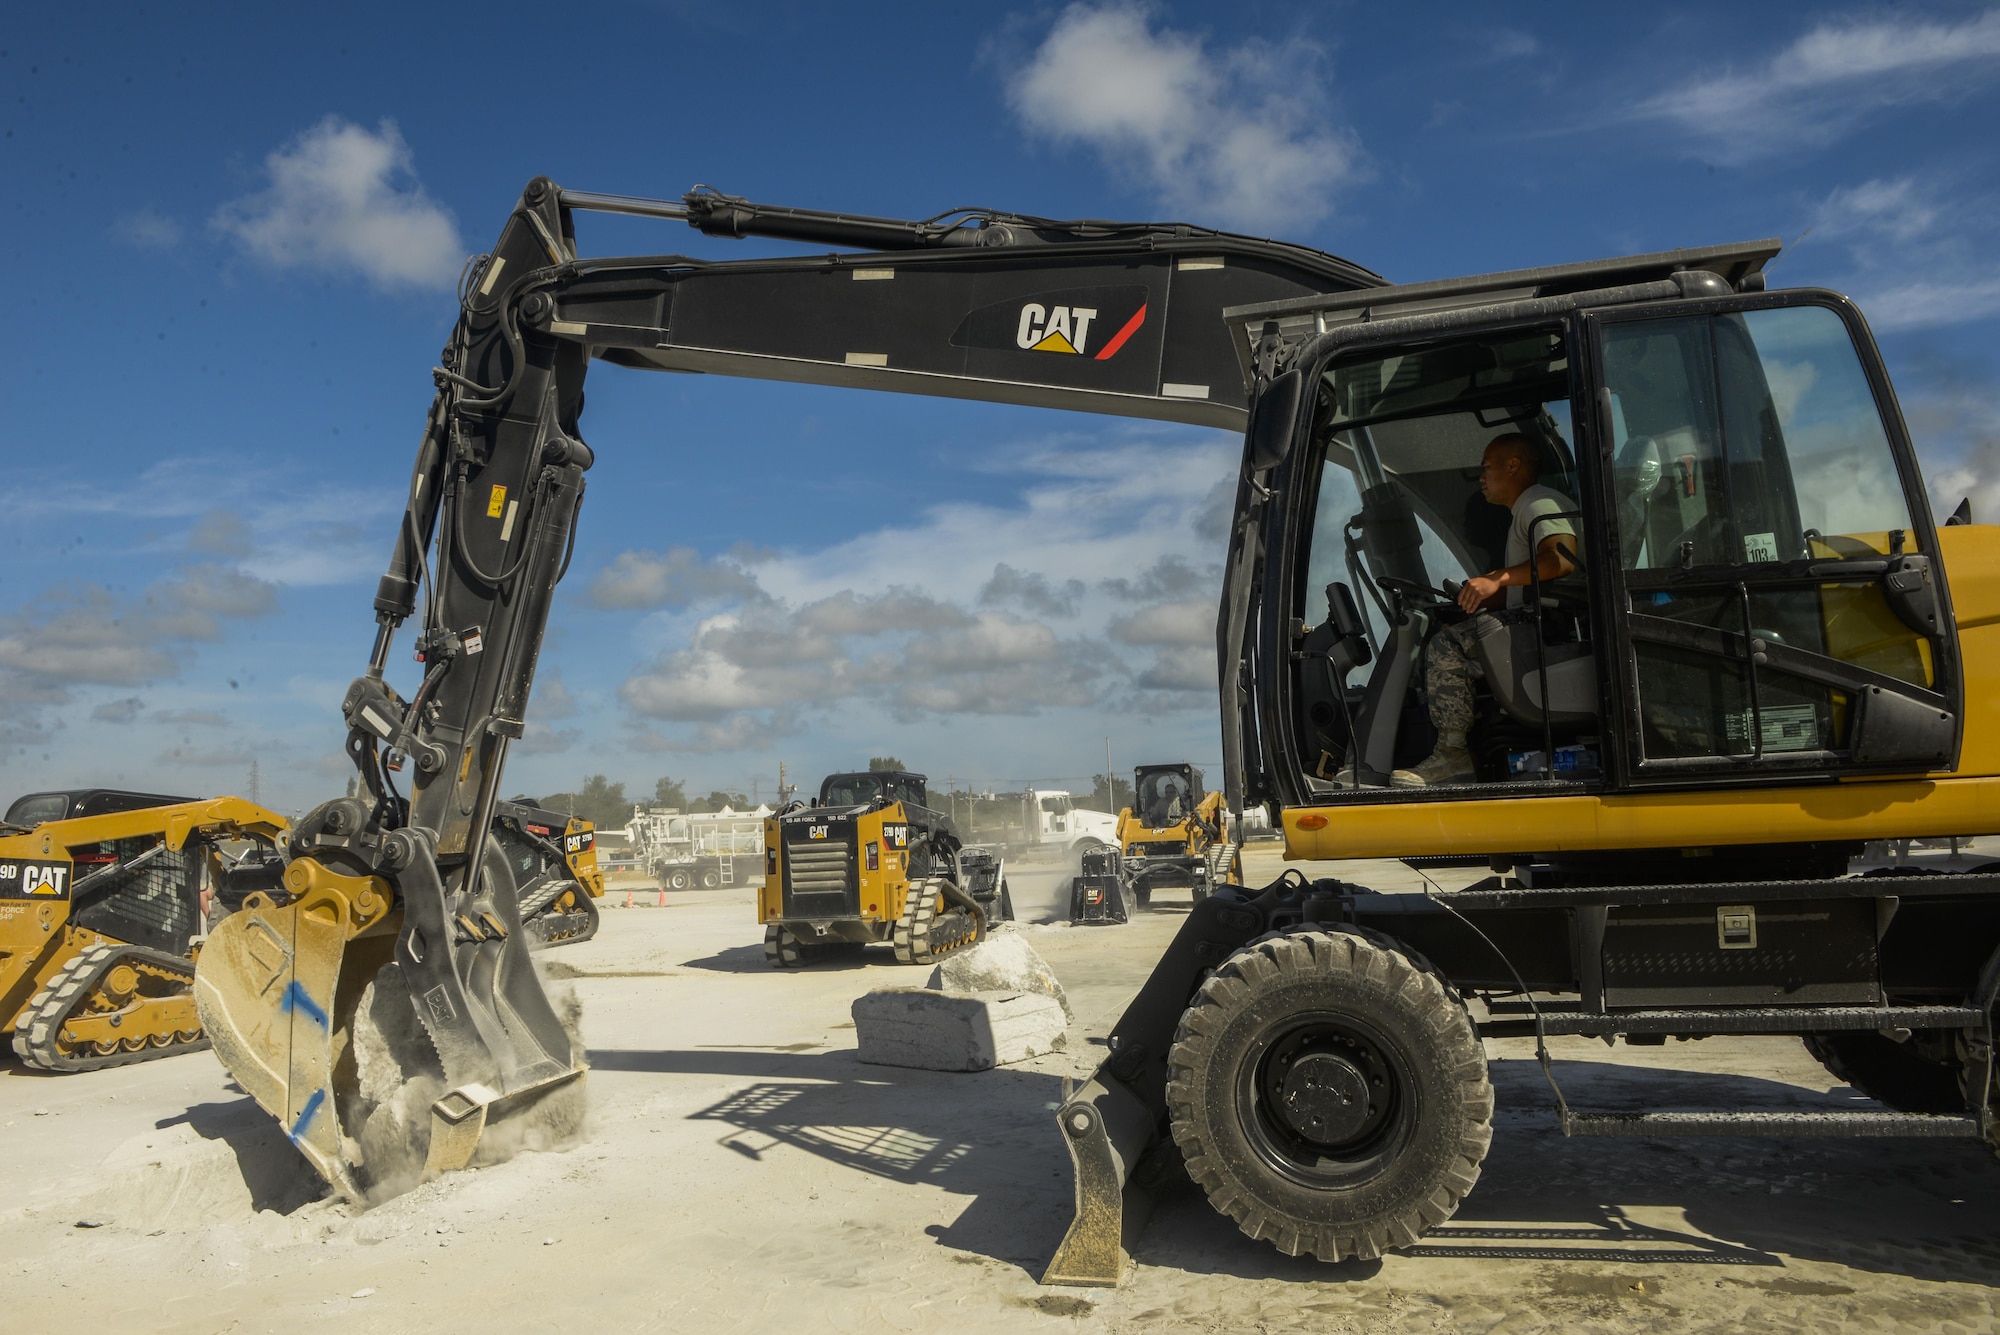 U.S. Air Force Airmen operate heavy machinery to clear debris away from a simulated damaged area created during rapid airfield damage repair training Sept, 15, 2016, at Kadena Air Base, Japan. The new process cuts the repair times from repairing three craters in 4 hours to repair 18 in less than double that time. (U.S. Air Force photo by Senior Airman Stephen G. Eigel)